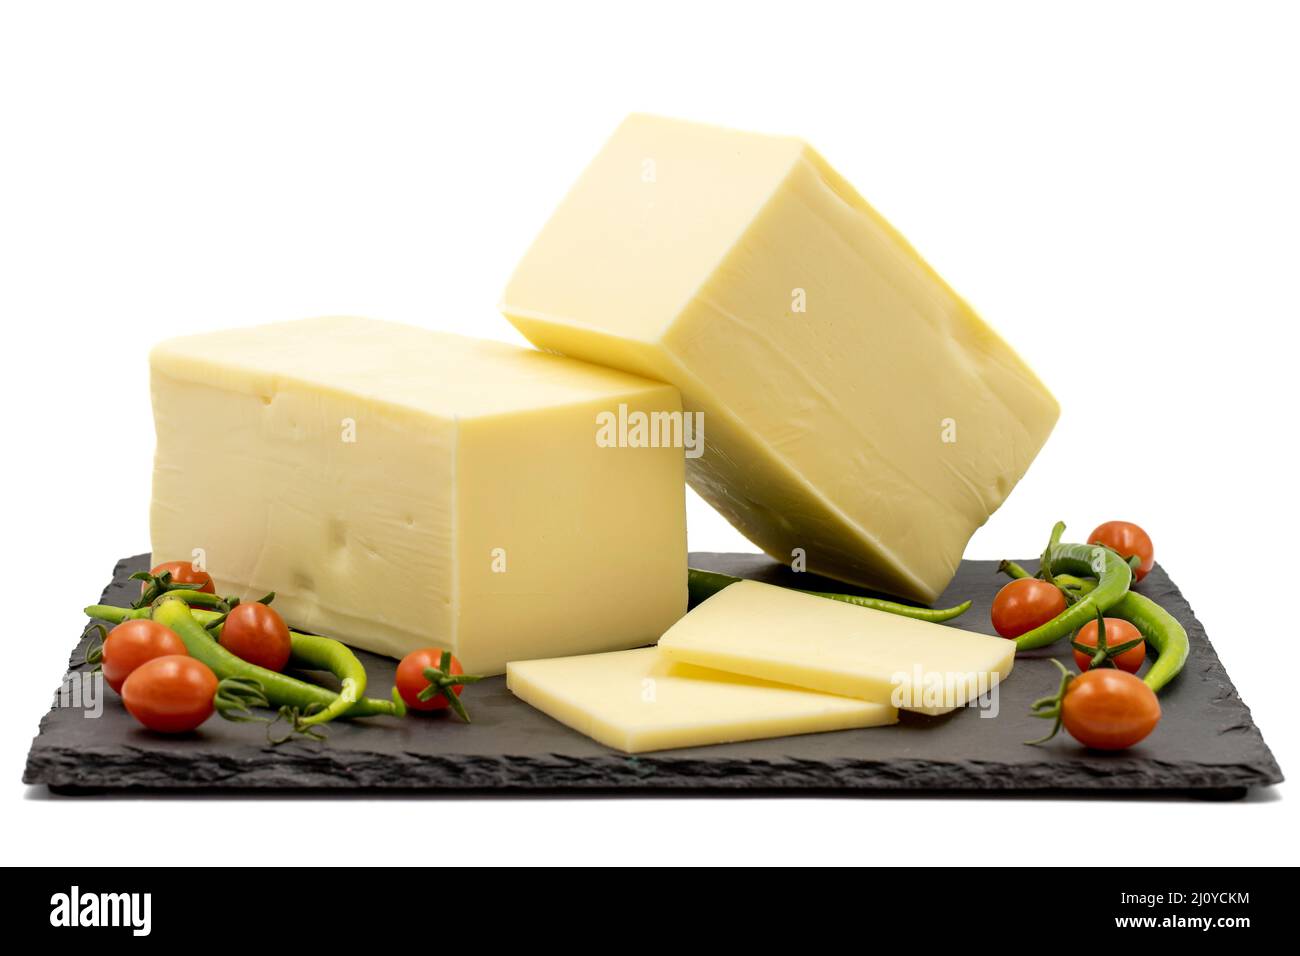 Cheddar cheese or kashkaval cheese isolated on white background. Cheese slices on the serving board Stock Photo